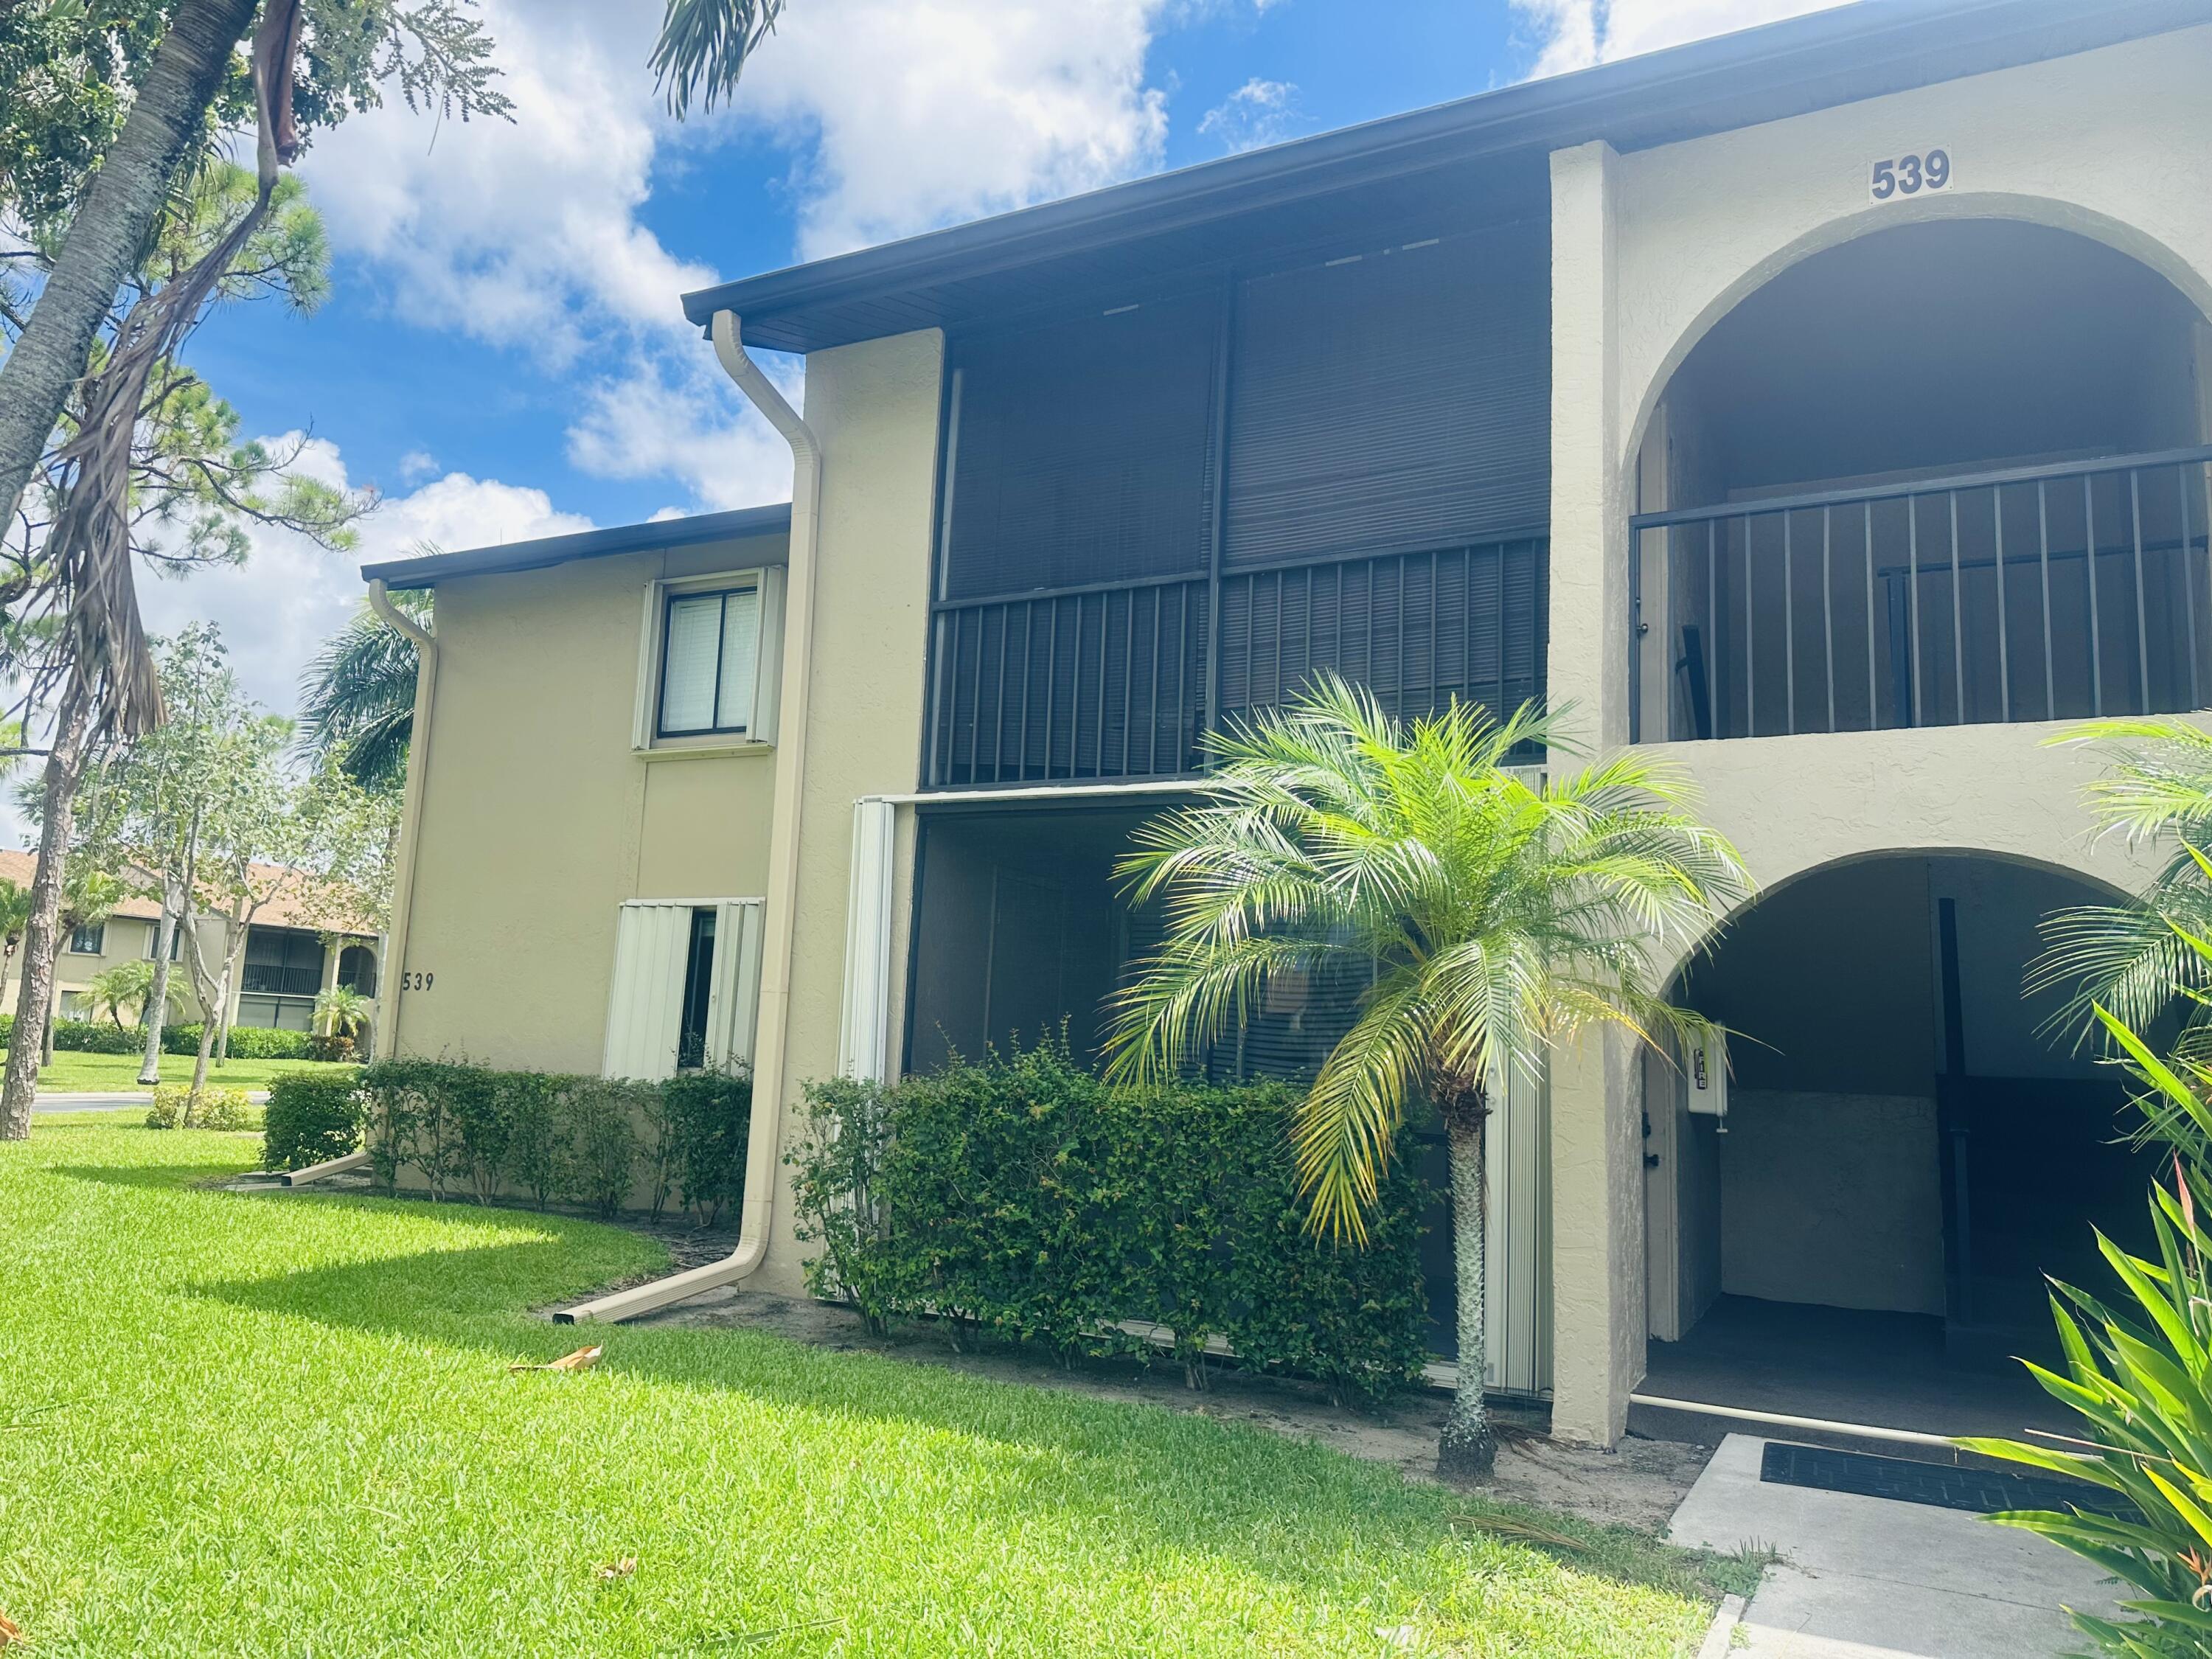 Property for Sale at 539 Shady Pine Way A1, Greenacres, Palm Beach County, Florida - Bedrooms: 2 
Bathrooms: 1  - $235,000